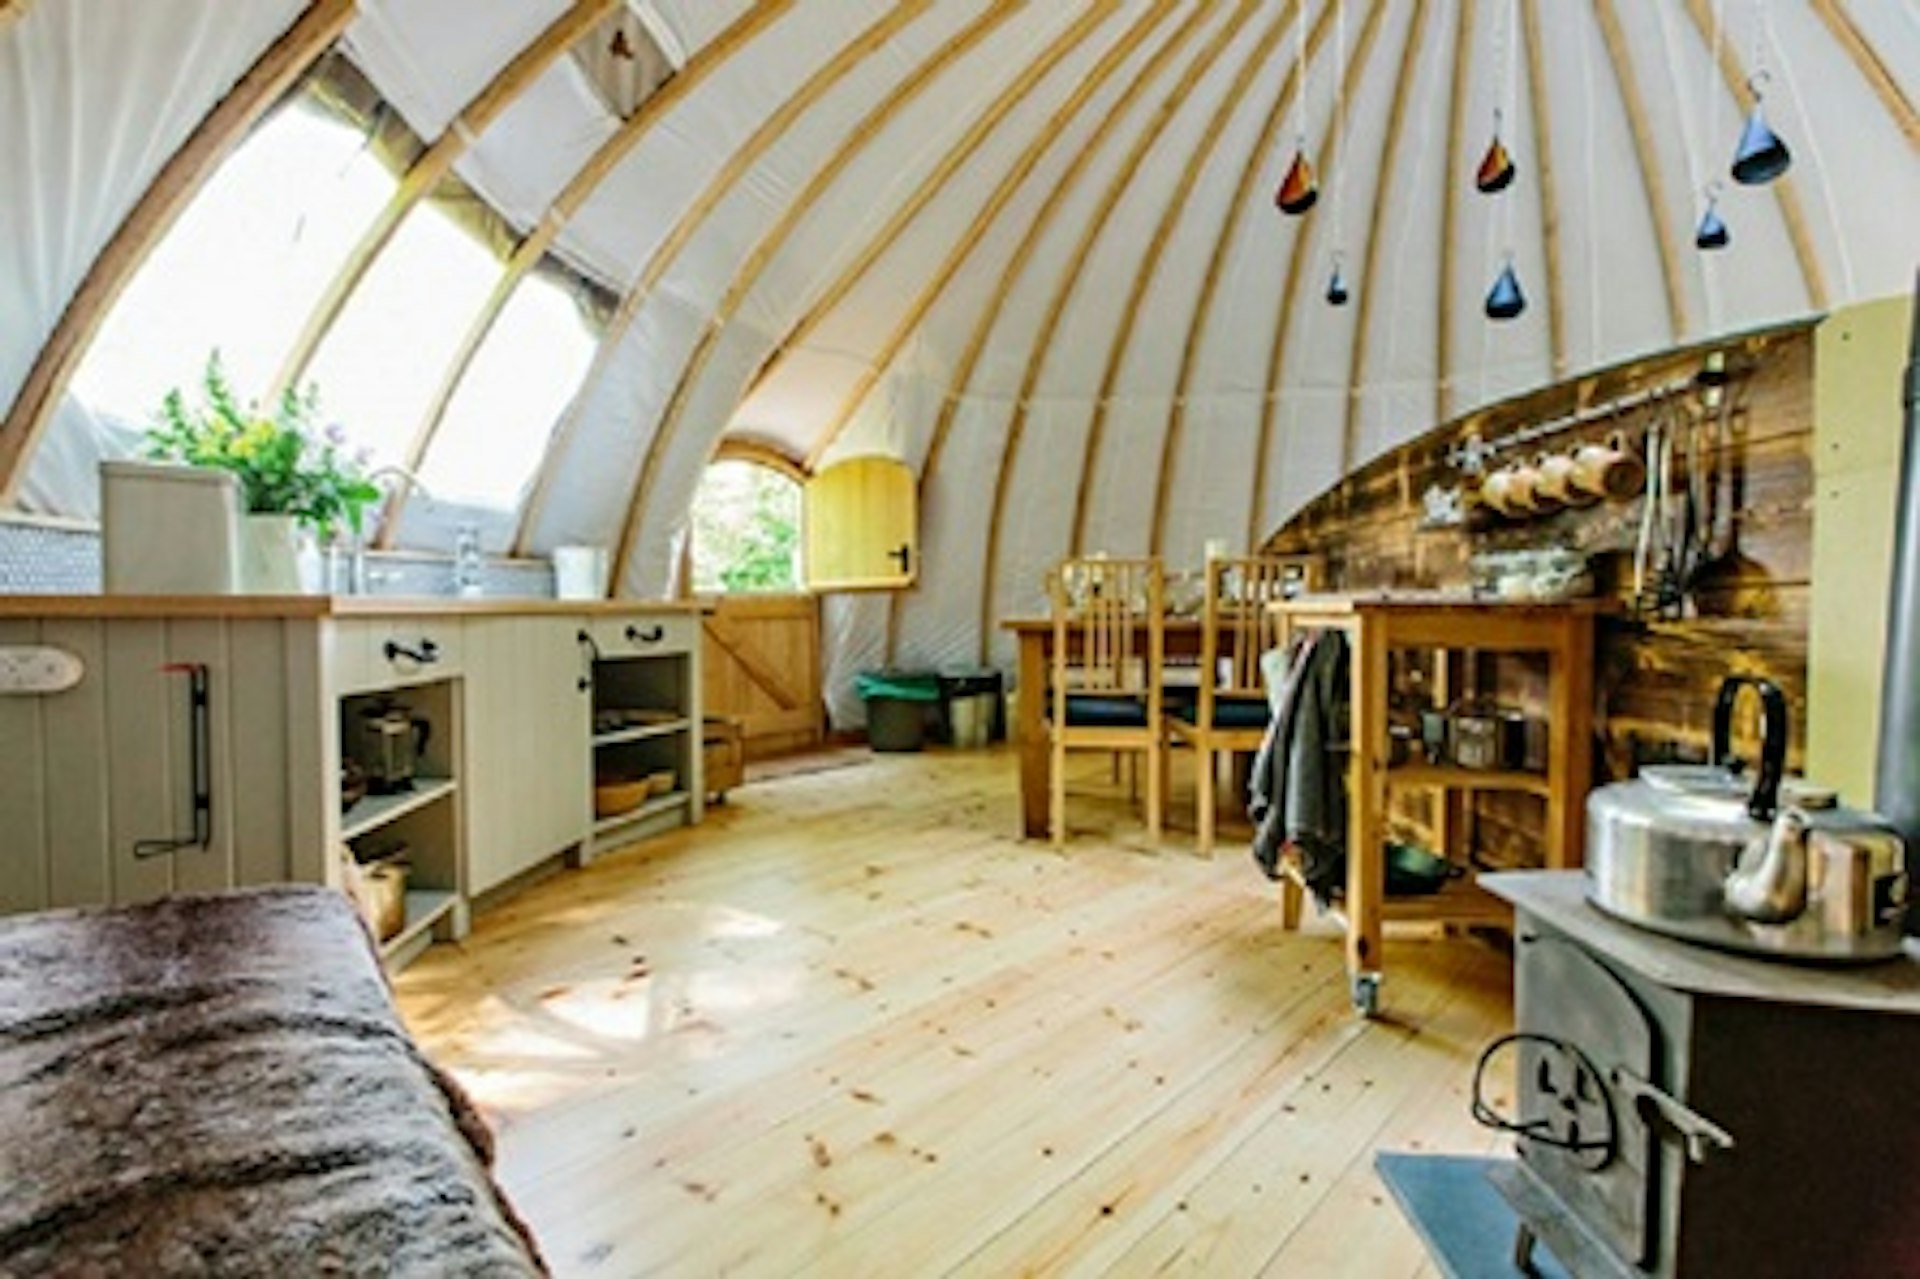 Four Night Midweek Break For Two in a Luxury Persian Tent at Penhein Glamping 1